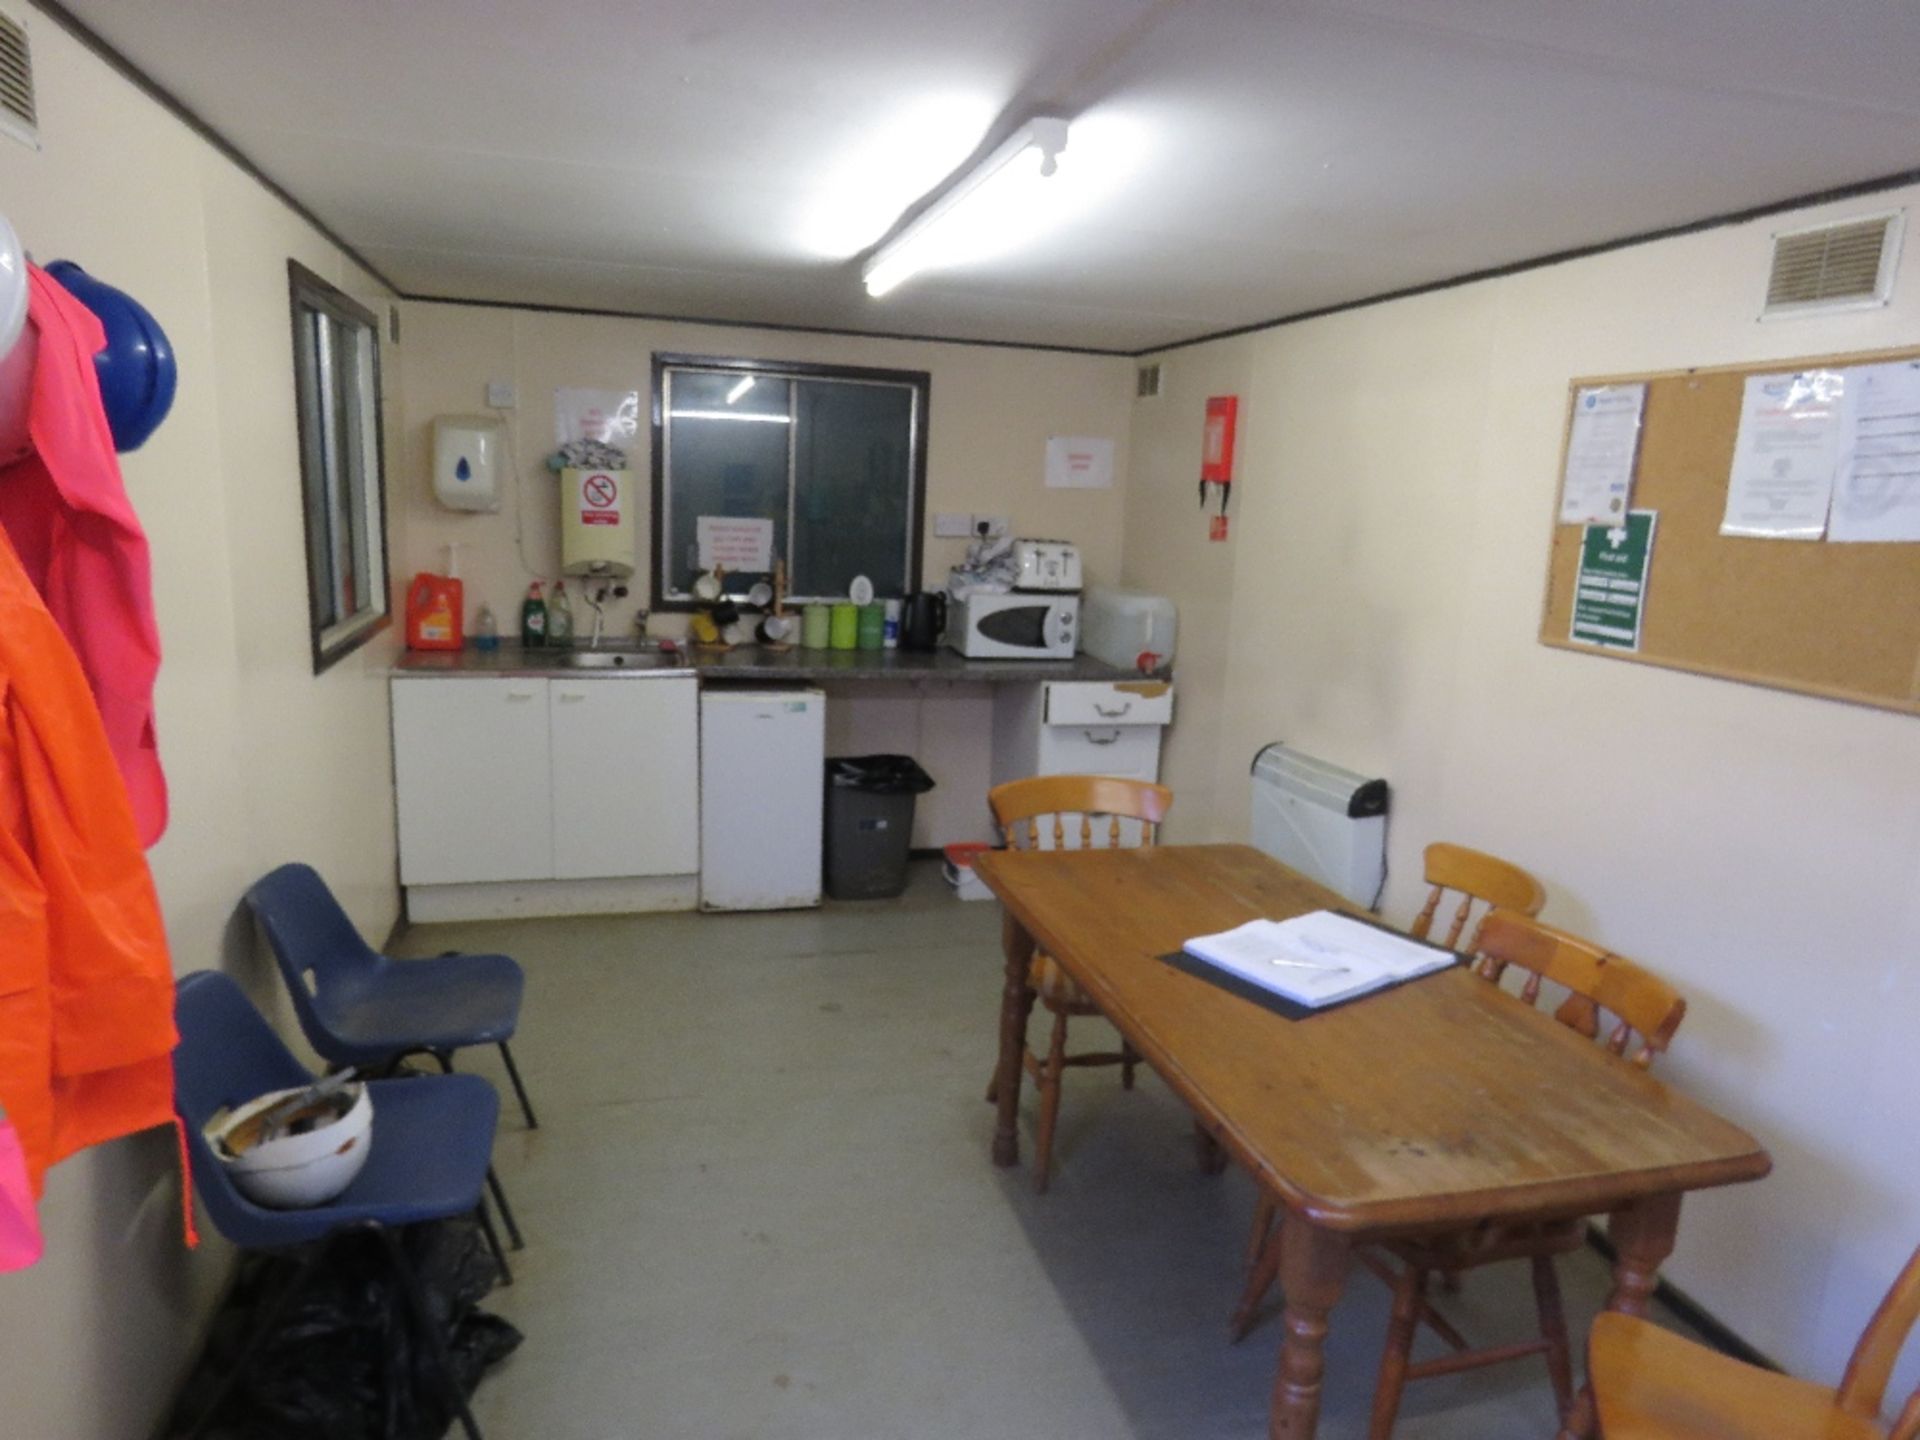 PORTABLE SITE OFFICE 32FT X 10FT APPROX WITH SMALL KITCHEN AREA AT ONE END. 60/40 SPLIT APPROX AS SH - Image 2 of 8